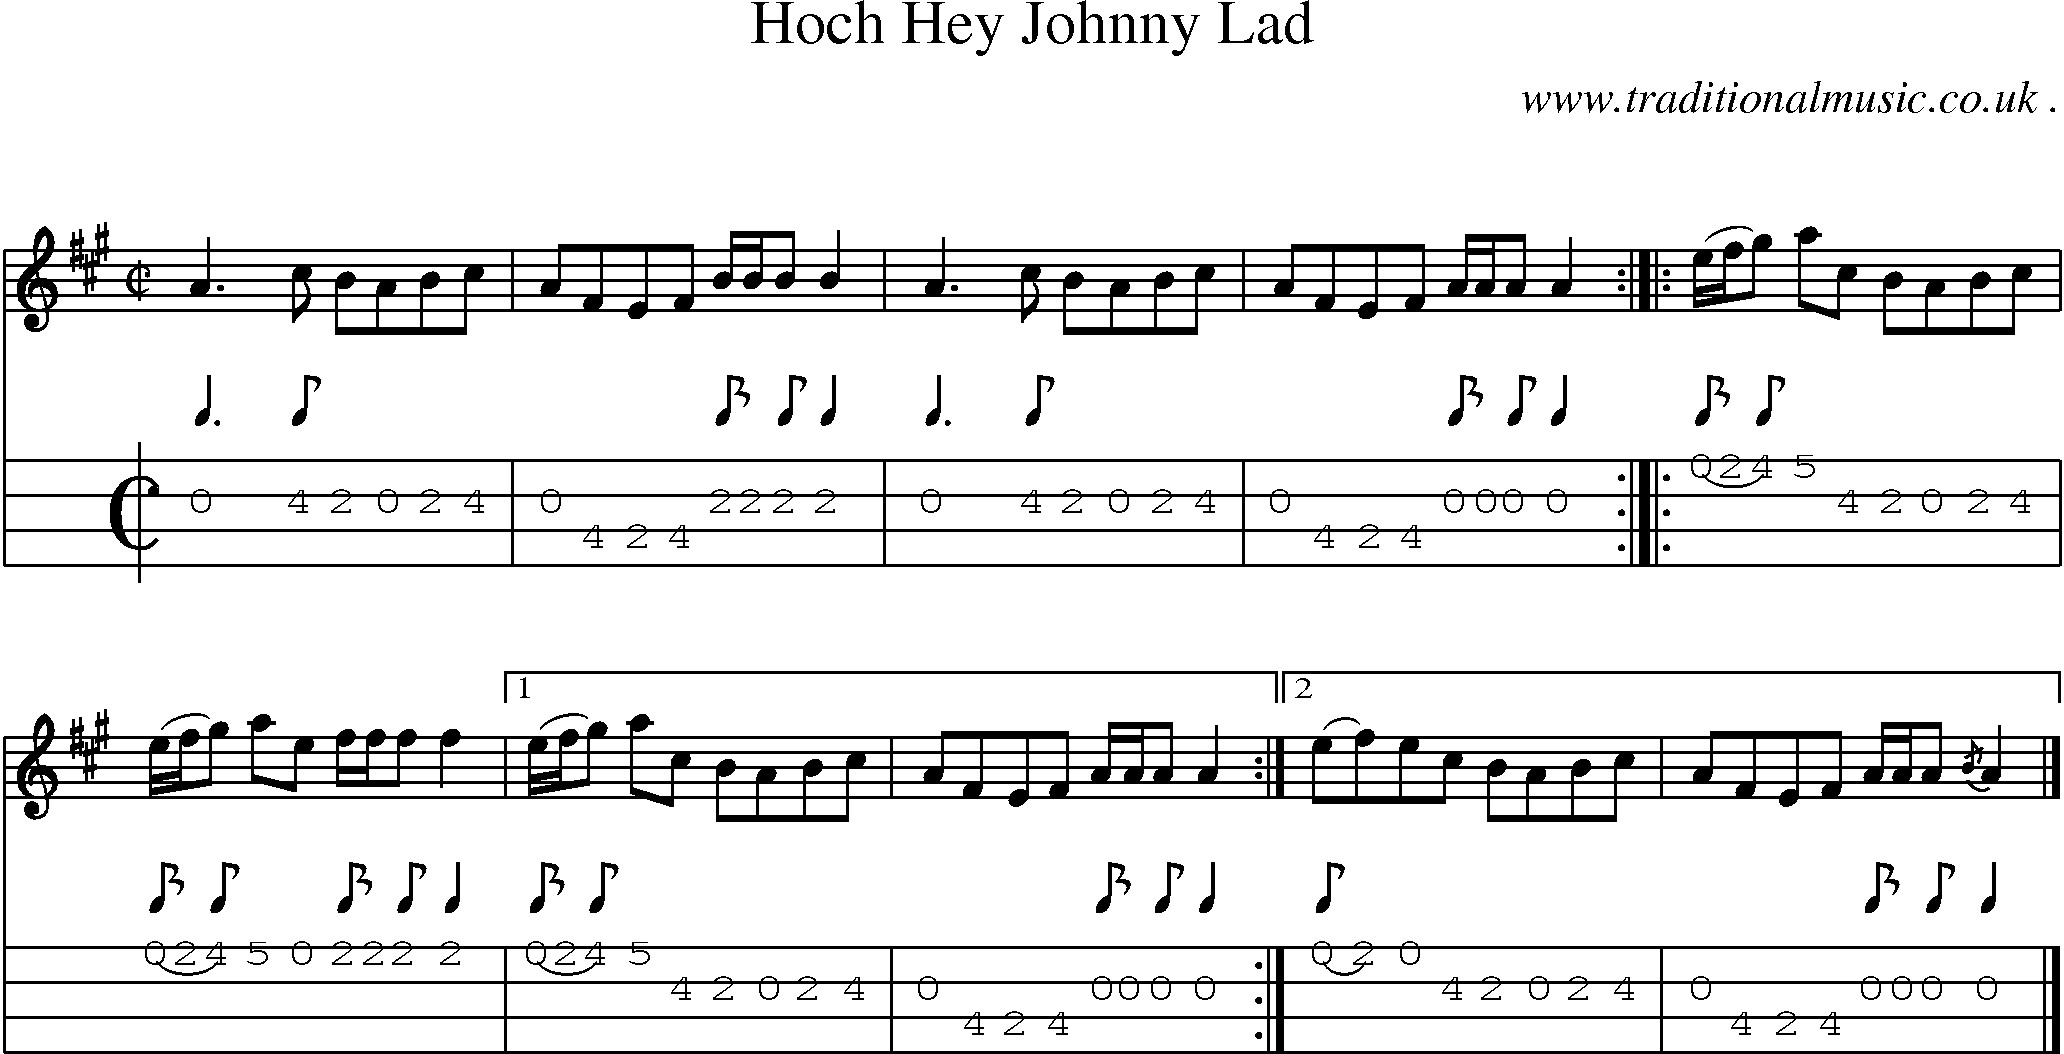 Sheet-music  score, Chords and Mandolin Tabs for Hoch Hey Johnny Lad